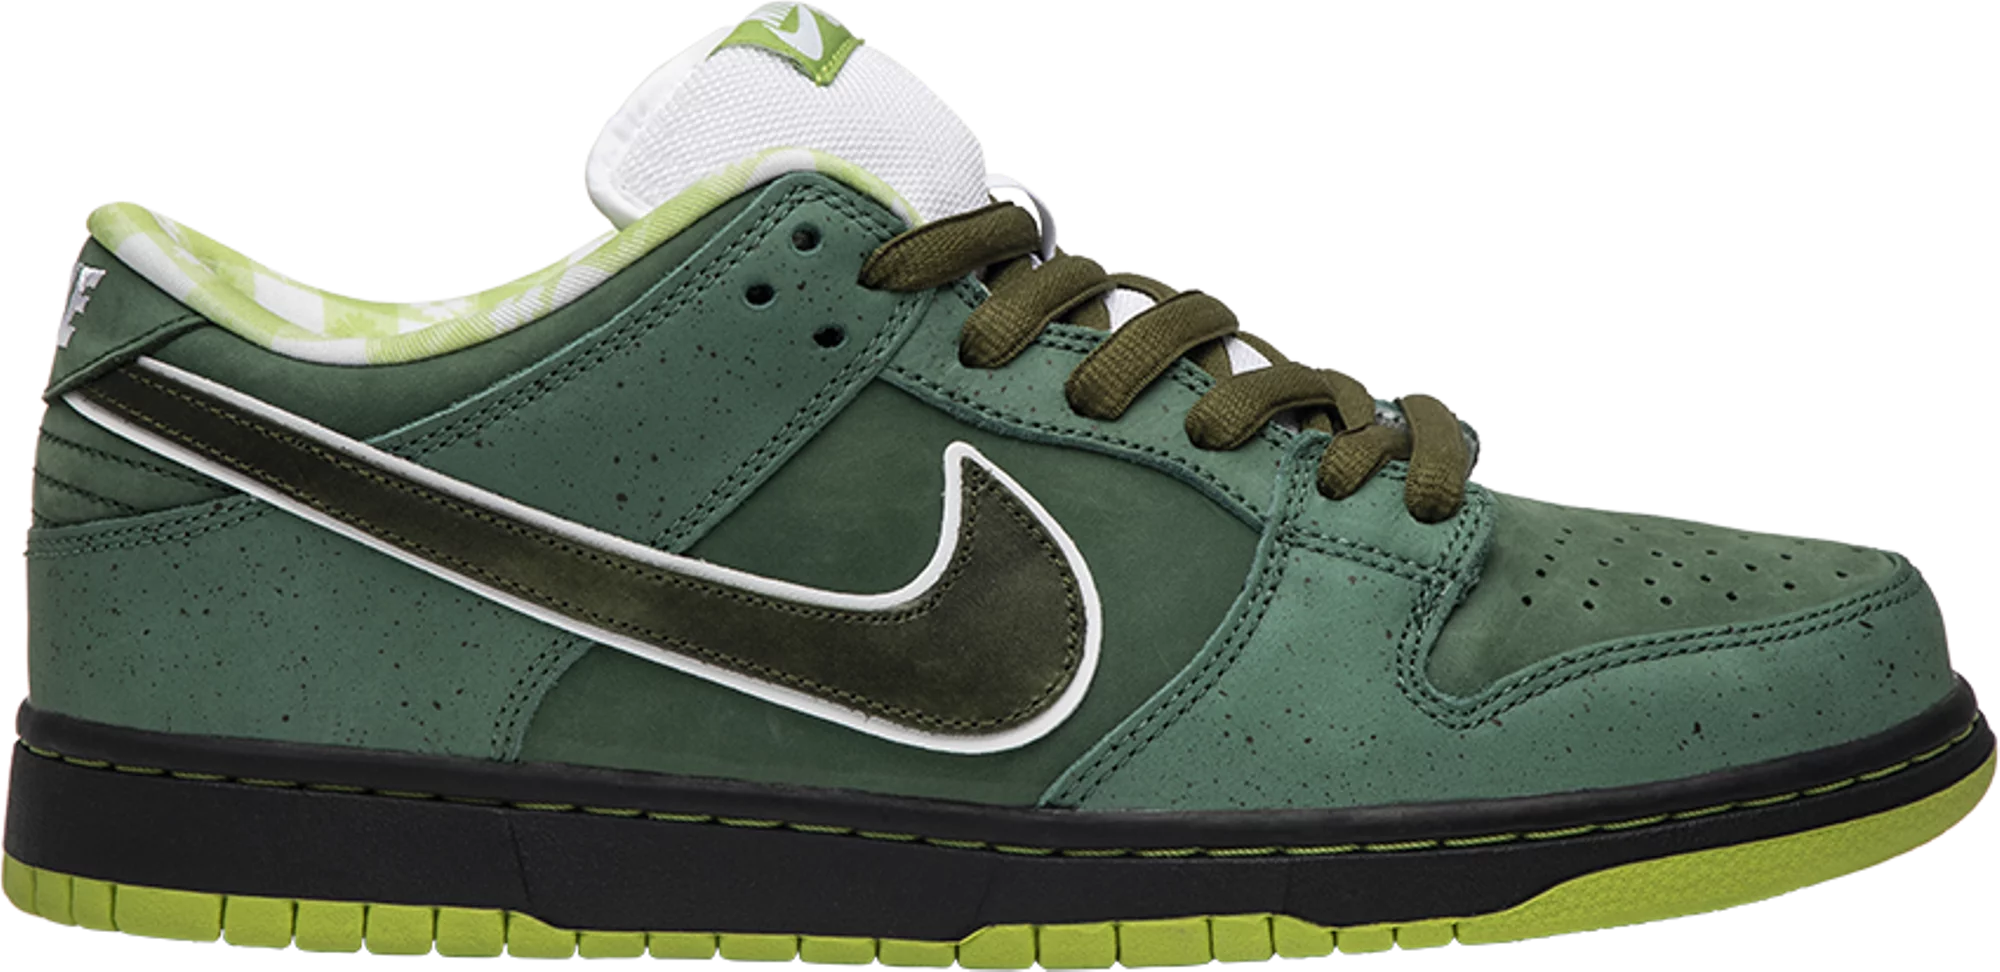 Nike SB Dunk Low "Concepts Green Lobster" 2018